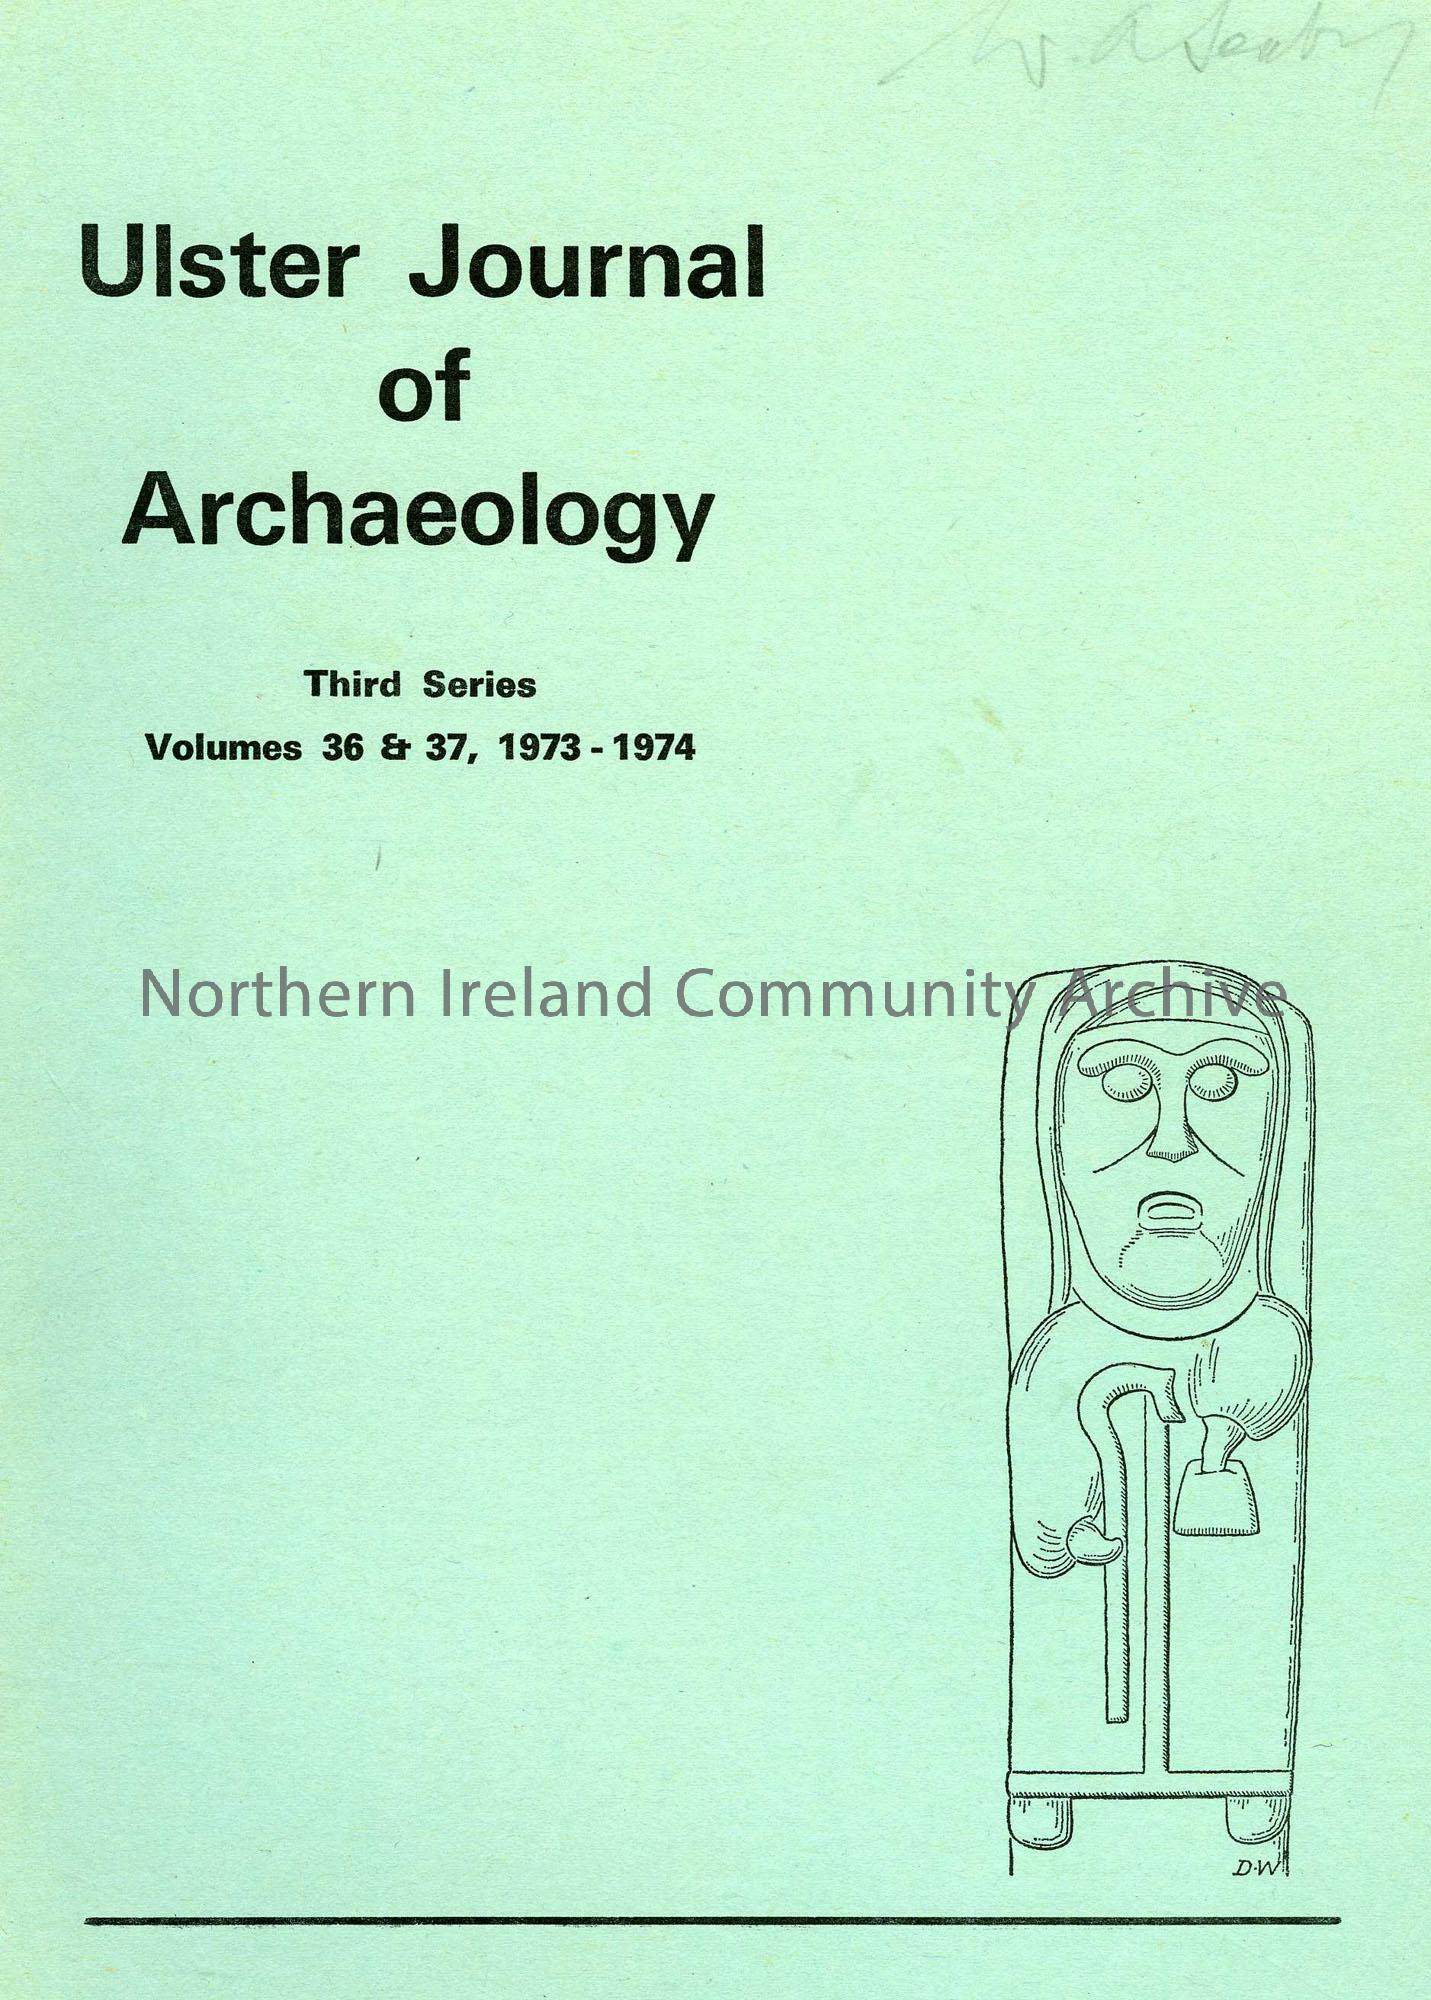 book titled, Ulster Journal of Archaeology. Third Series Volume 36 and 37, 1973-1974 (3413)